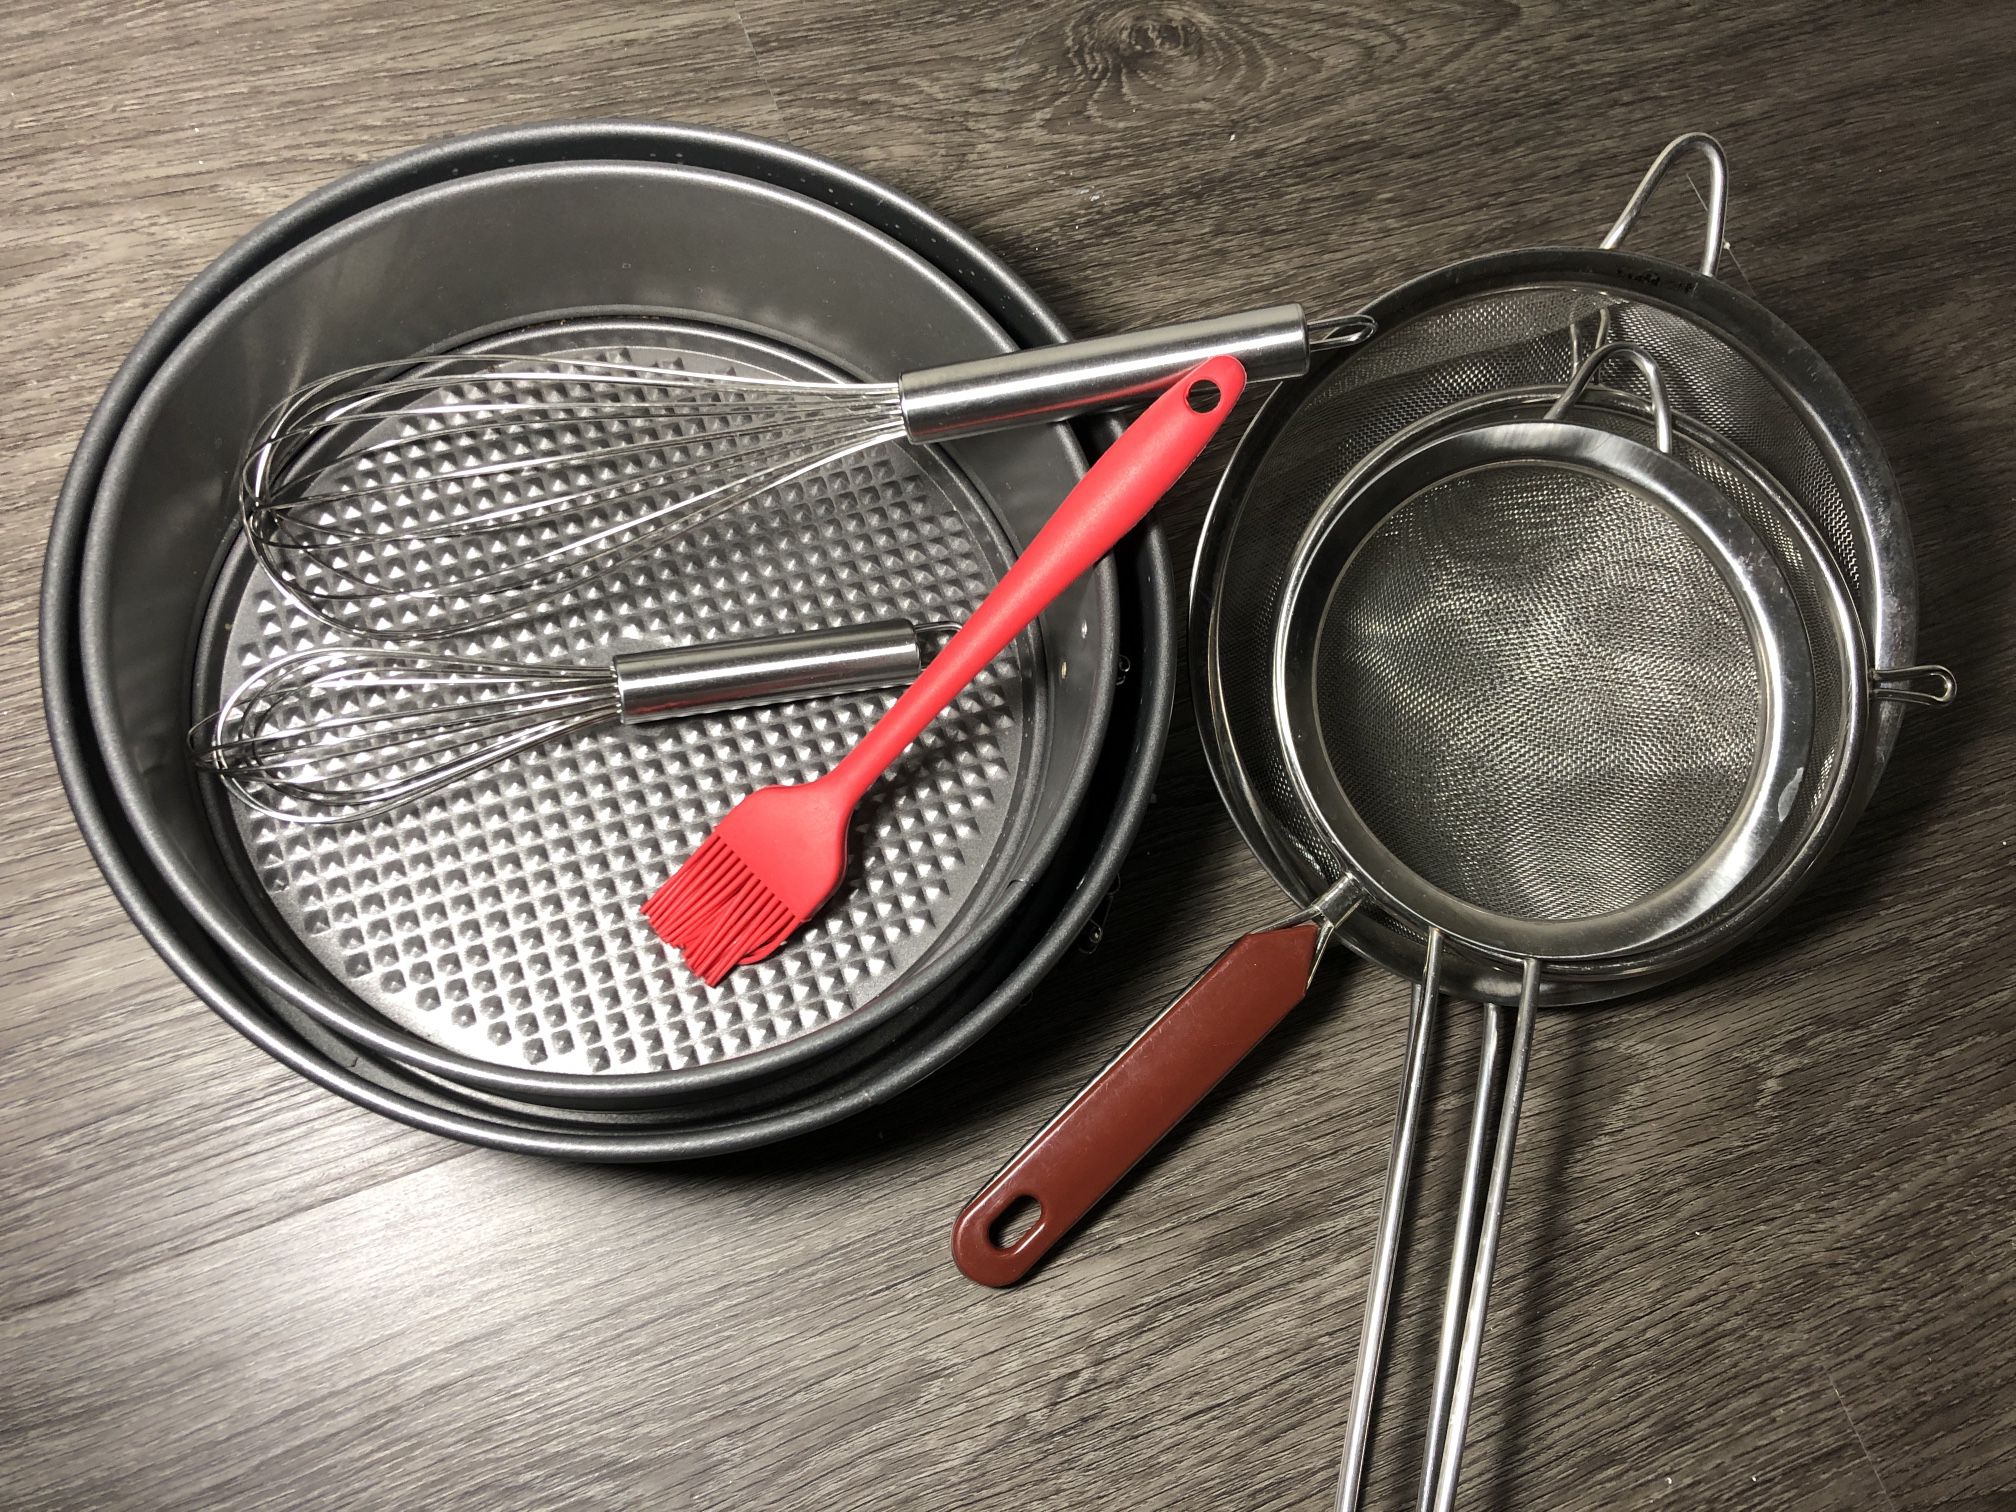 Kitchen Supplies (Everything For Free! Swipe To See Pics)